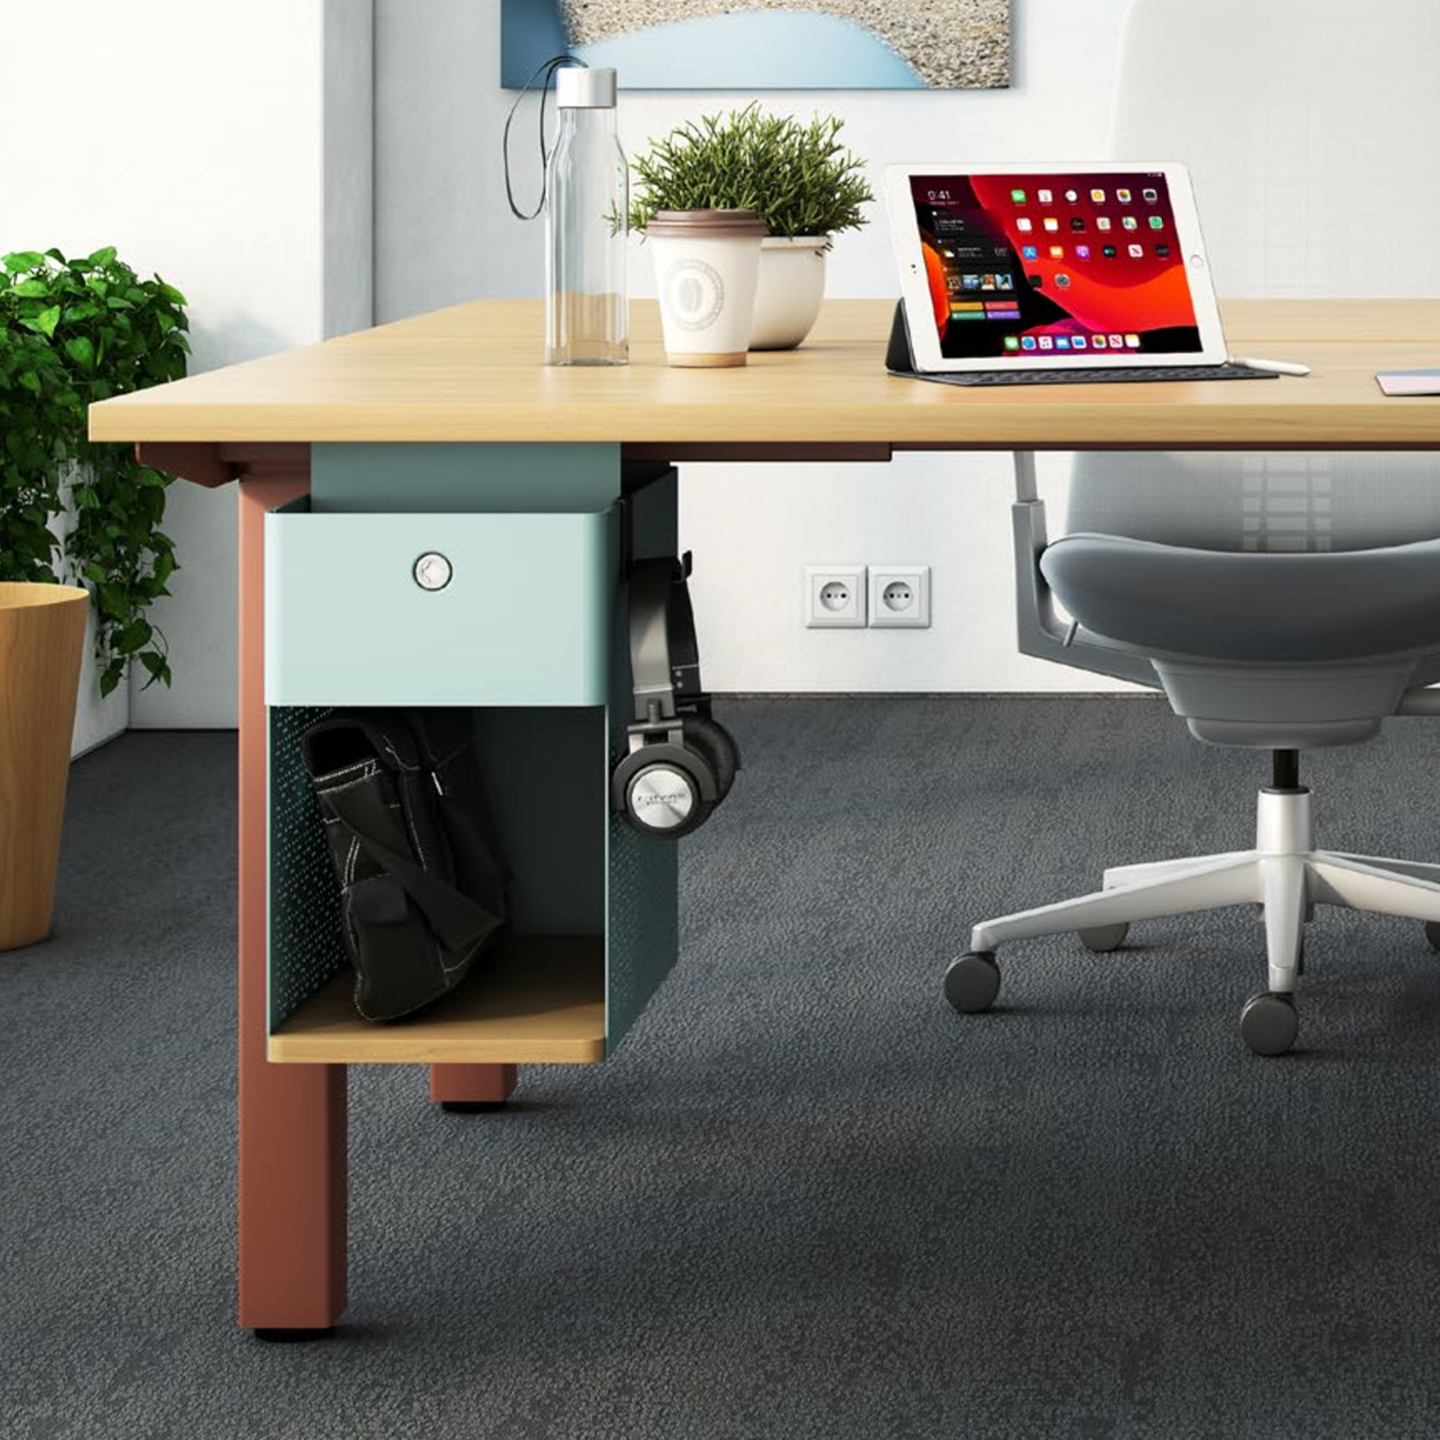 Active Components at individual workstation in orange with shelf and drawer under desk.